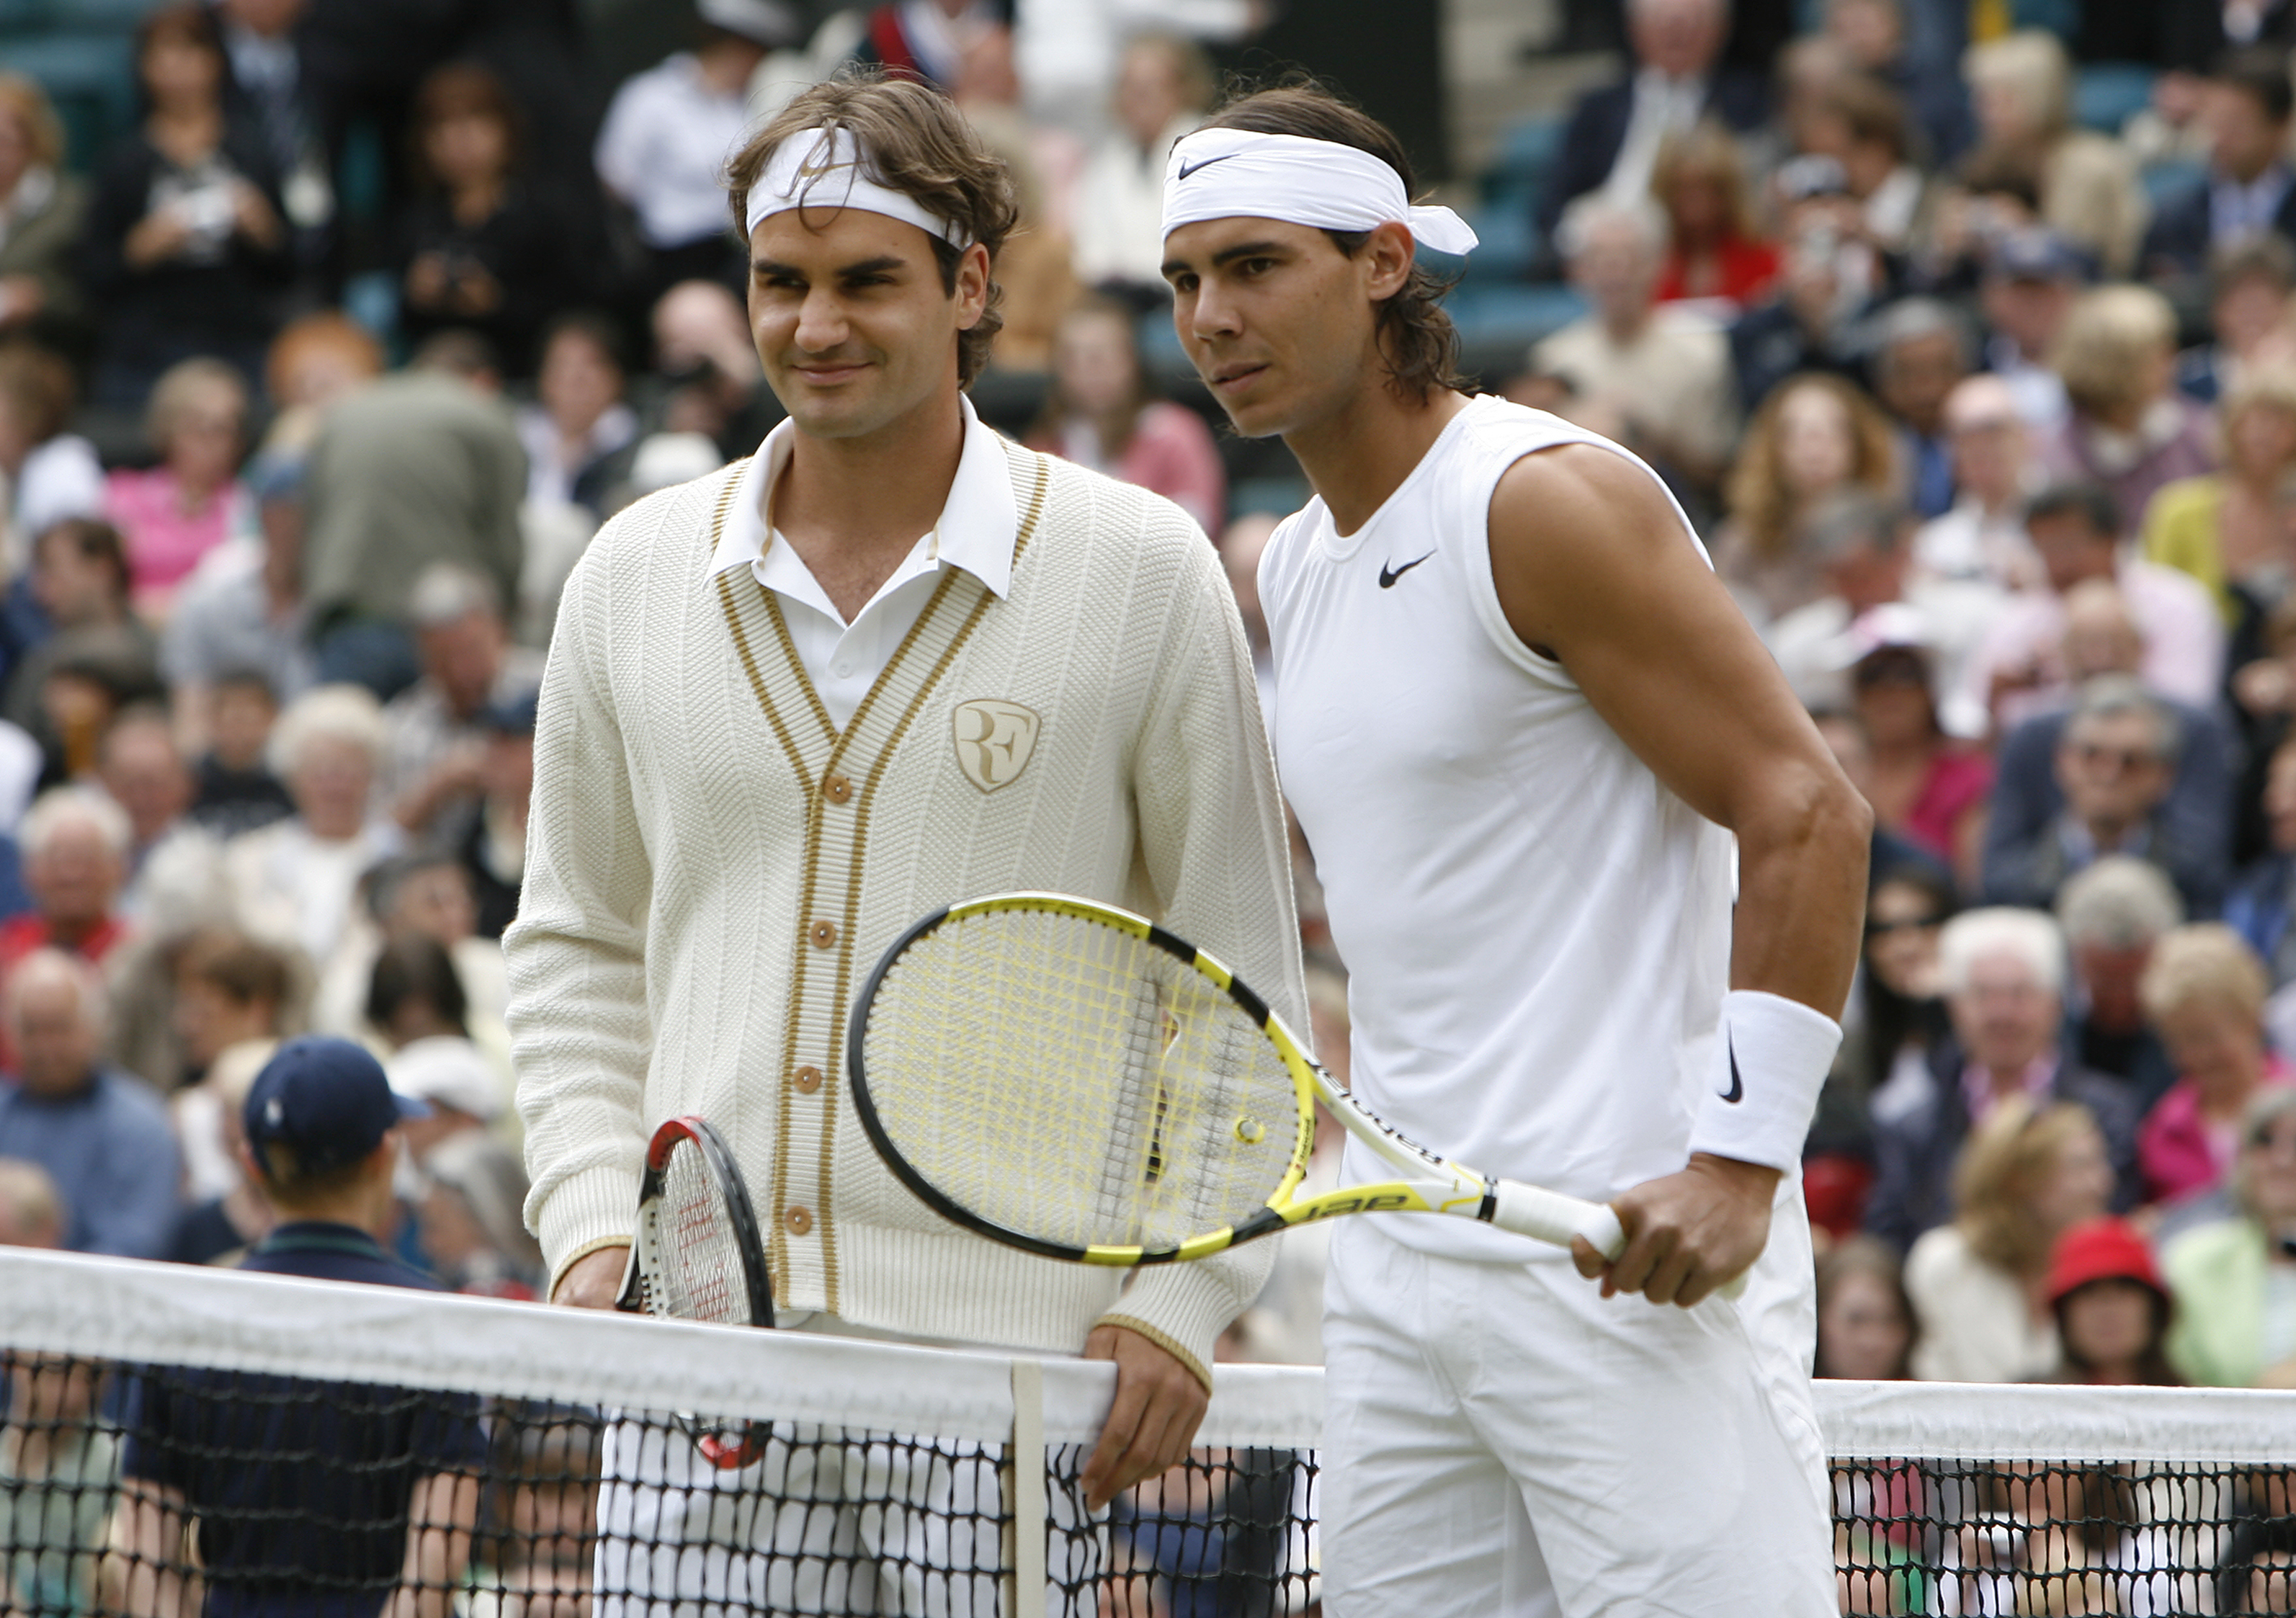 Getting ready for the epic final between legends Federer and Nadal in